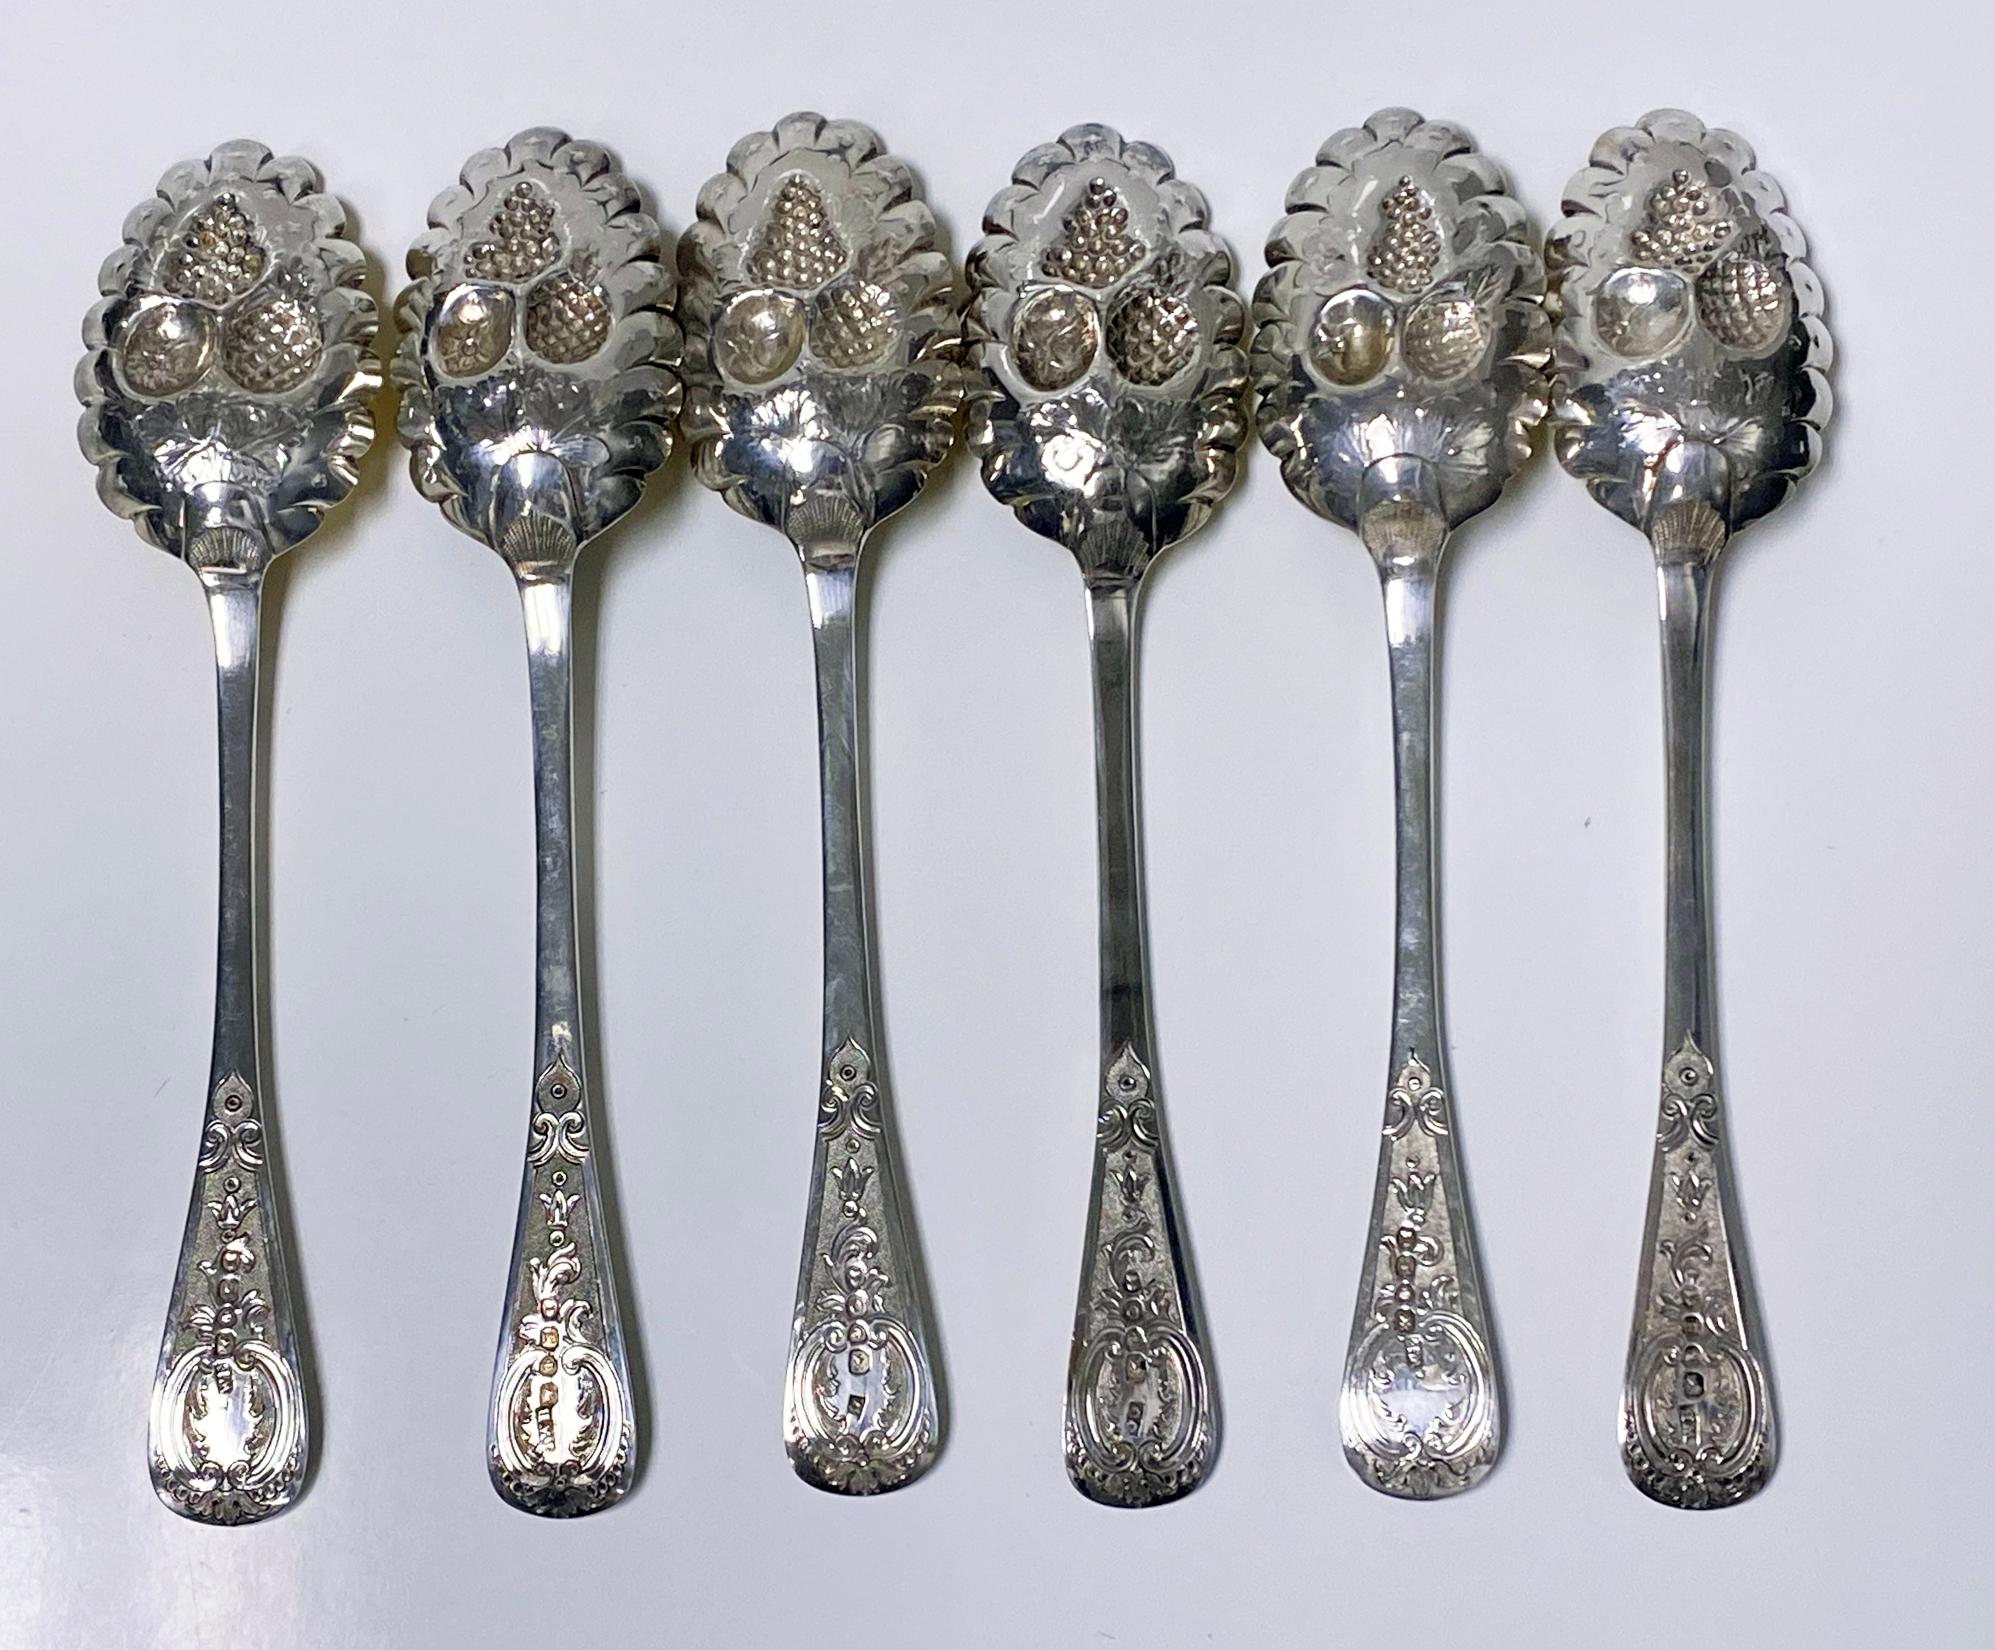 Set of 6 Georgian silver berry spoons, London, 1823-1829. Each of matching typical form, gilded embossed Berry scalloped bowls, handles with foliate Rocaille decoration on stippled background. 2 London 1823 William Eaton, 2 London 1827 John William